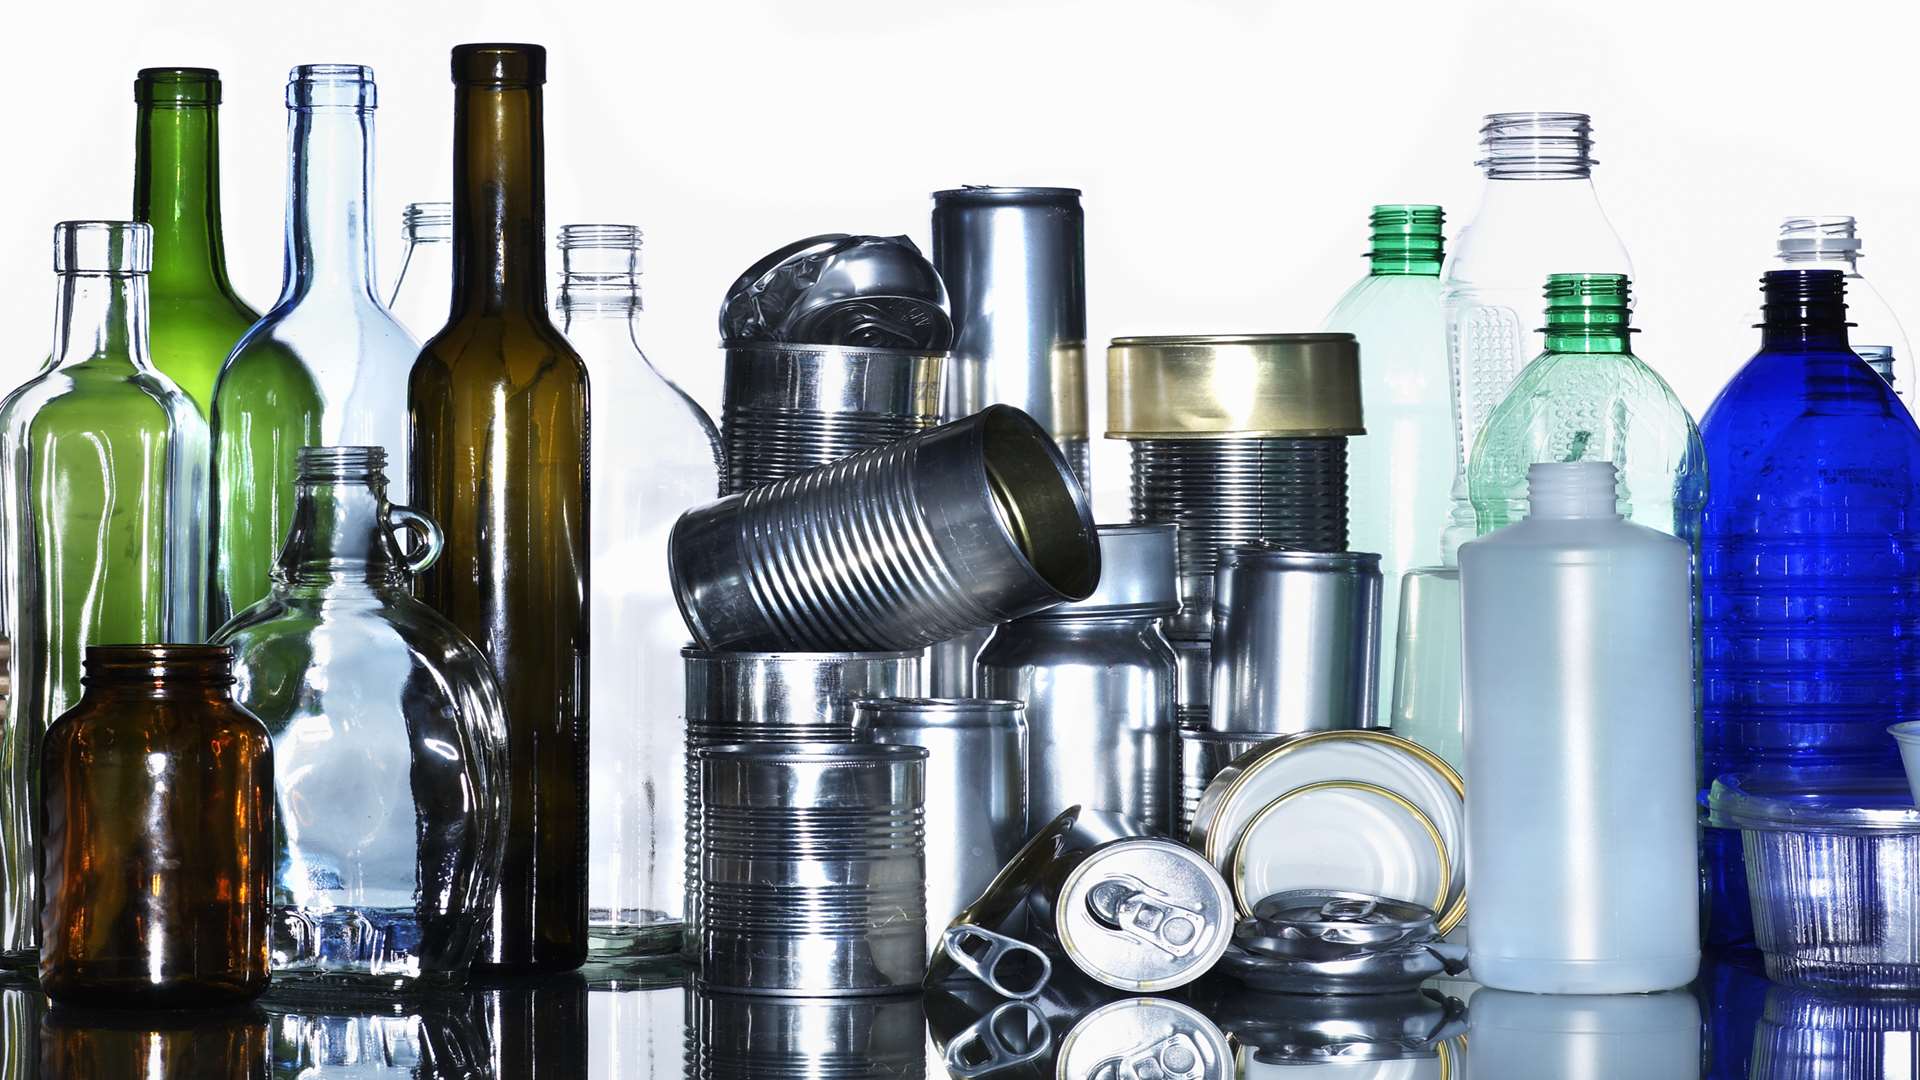 Cardboard, glass, plastic and aluminium can all be recycled.